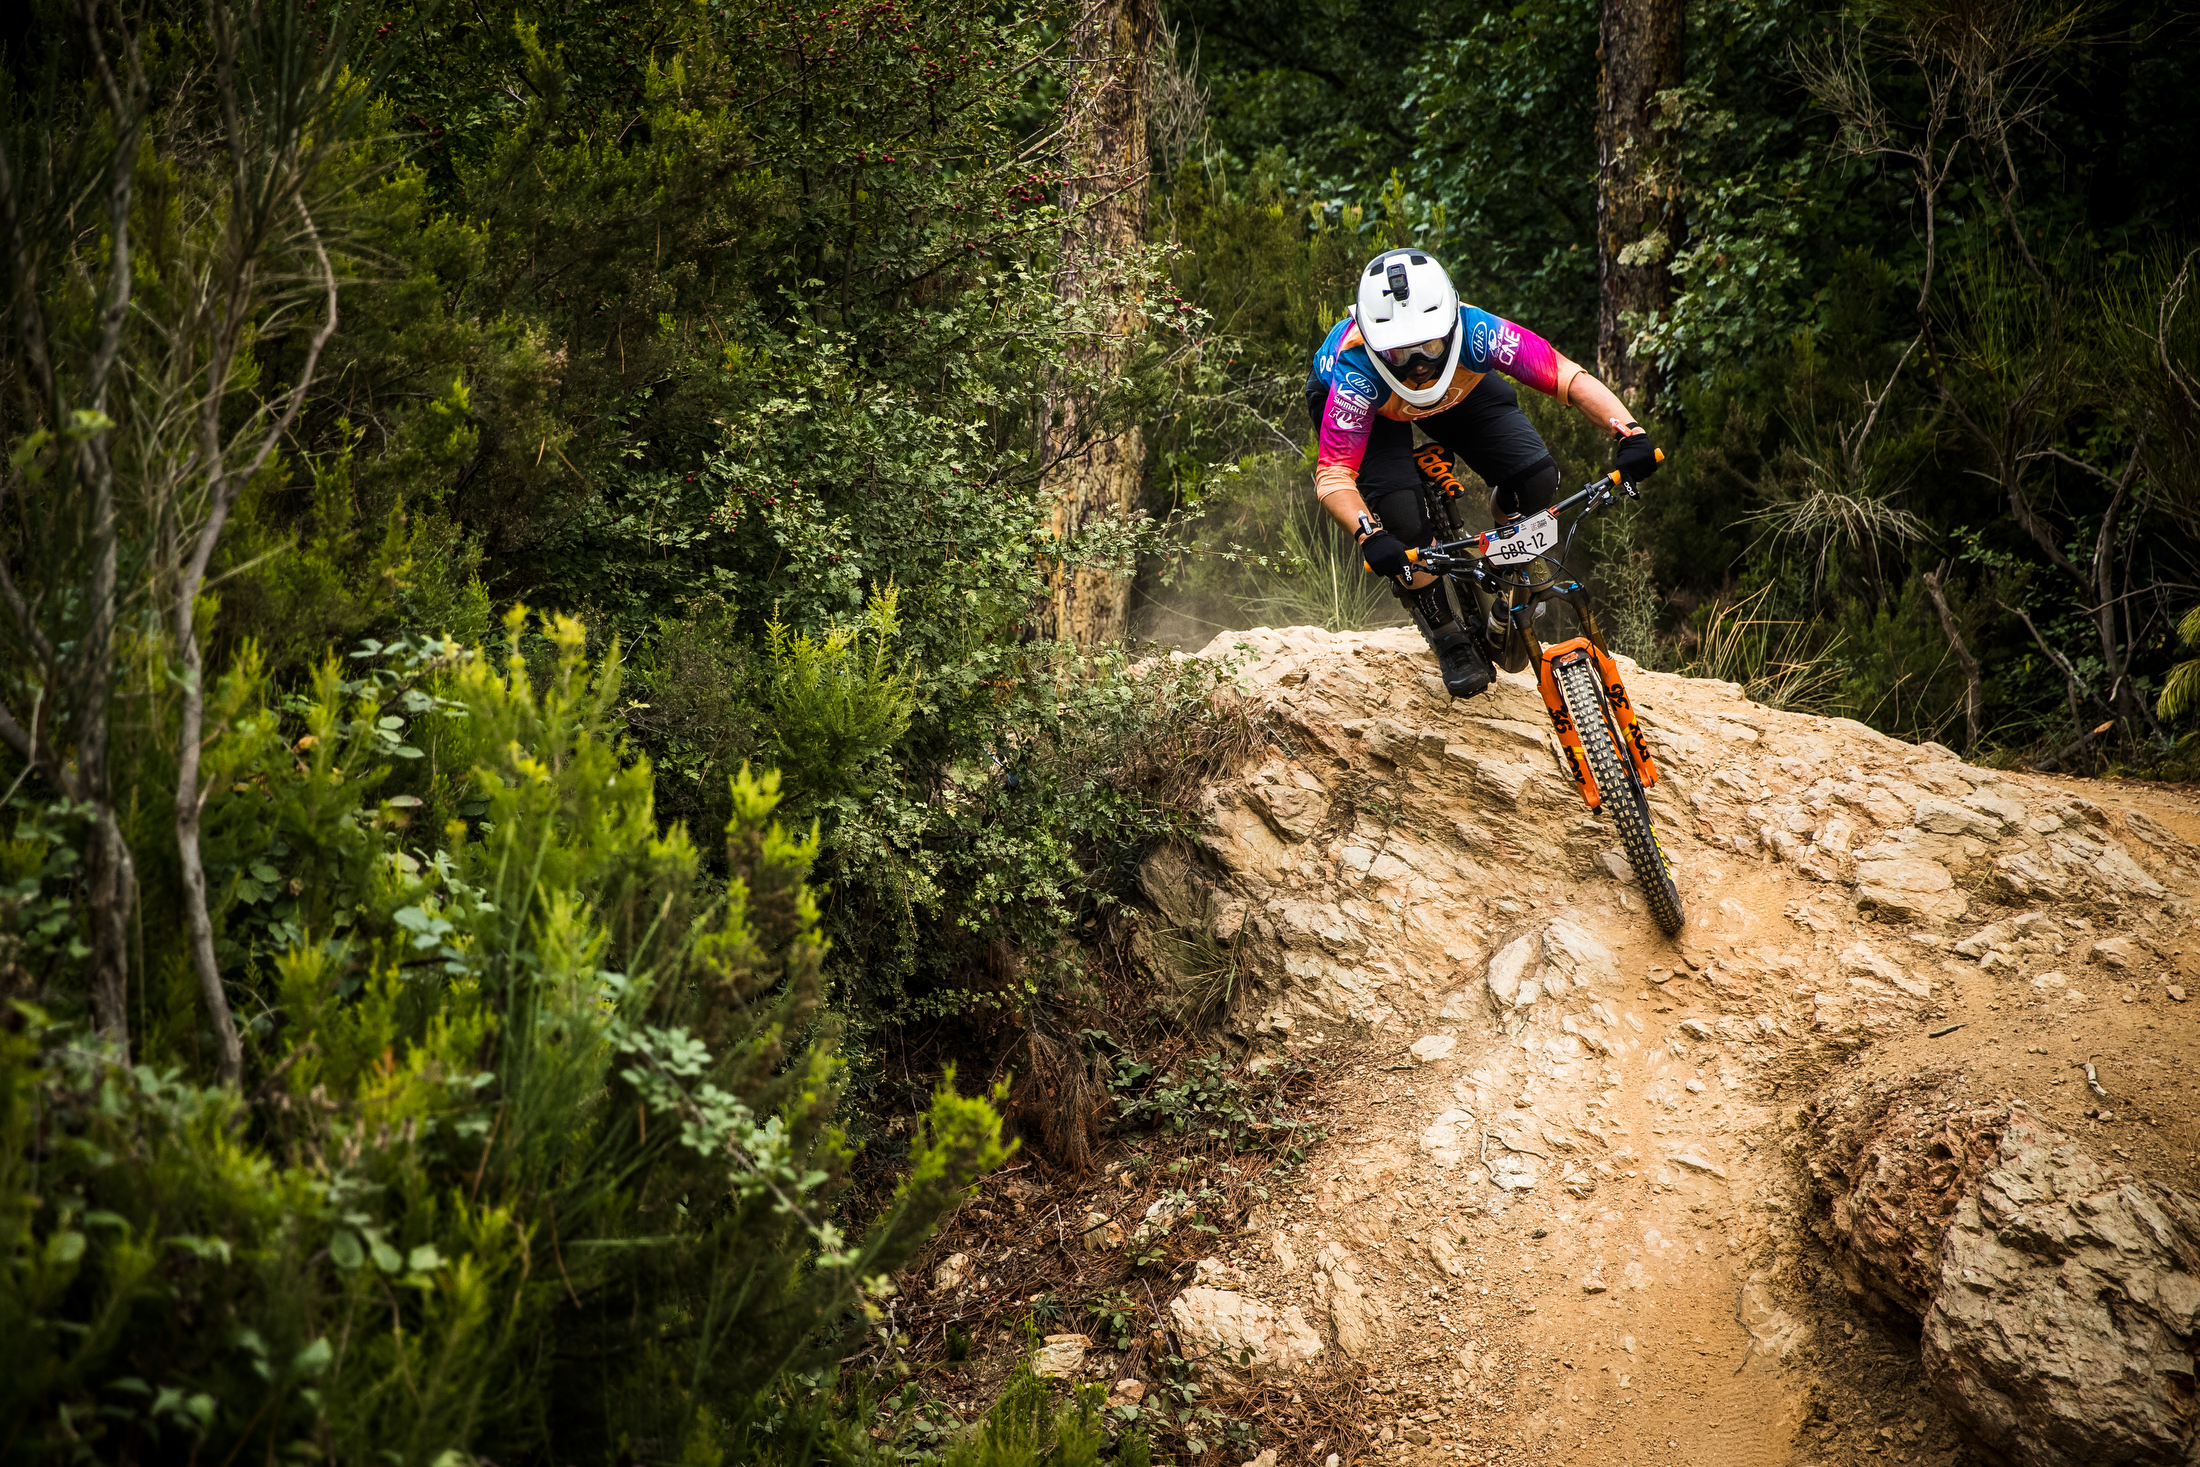 Bex Barona rolls down the back side of a boulder in her tie-dye Ibis jersey.